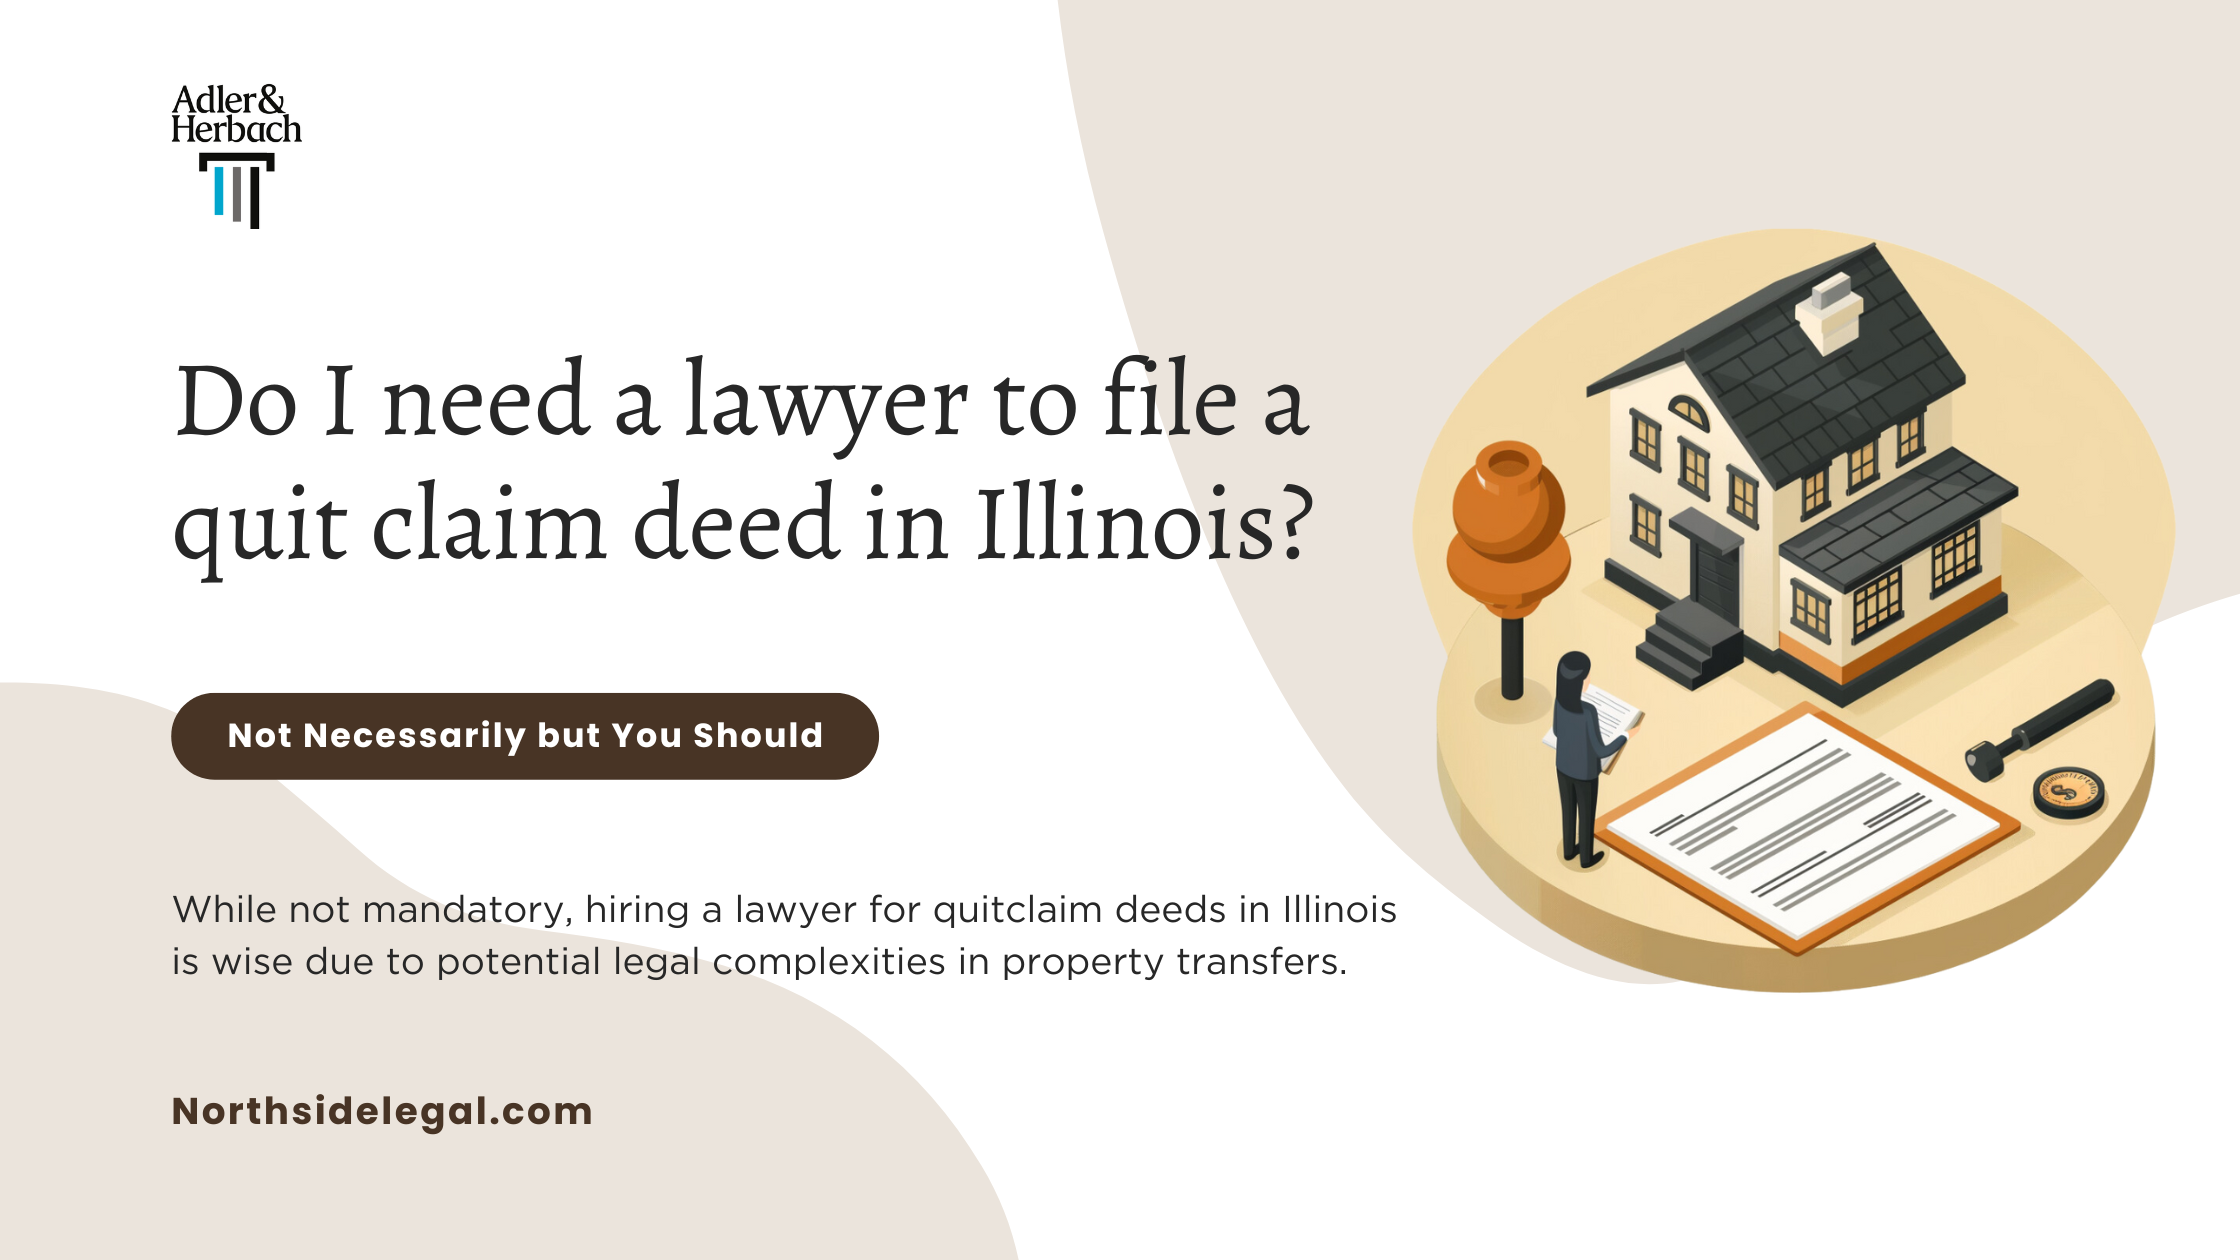 Do I need a lawyer to file a quit claim deed in Illinois? While not mandatory, hiring a lawyer for quitclaim deeds in Illinois is wise due to potential legal complexities in property transfers.